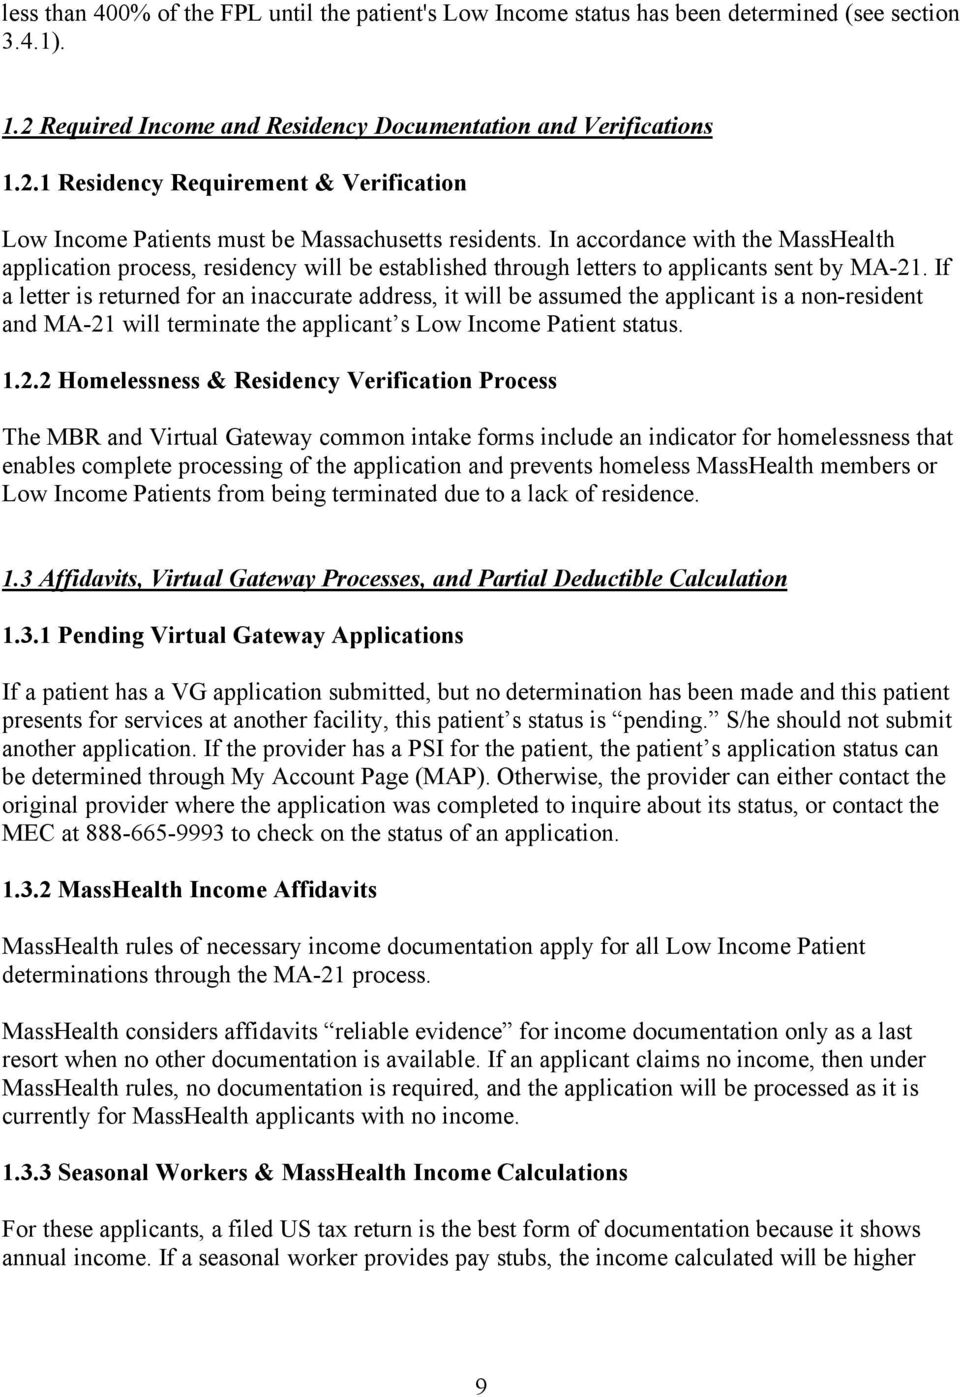 Health Safety Net Provider Faq Frequently Asked Questions About Health Safety Net Hsn Regulations Eligibility And Billing Pdf Free Download